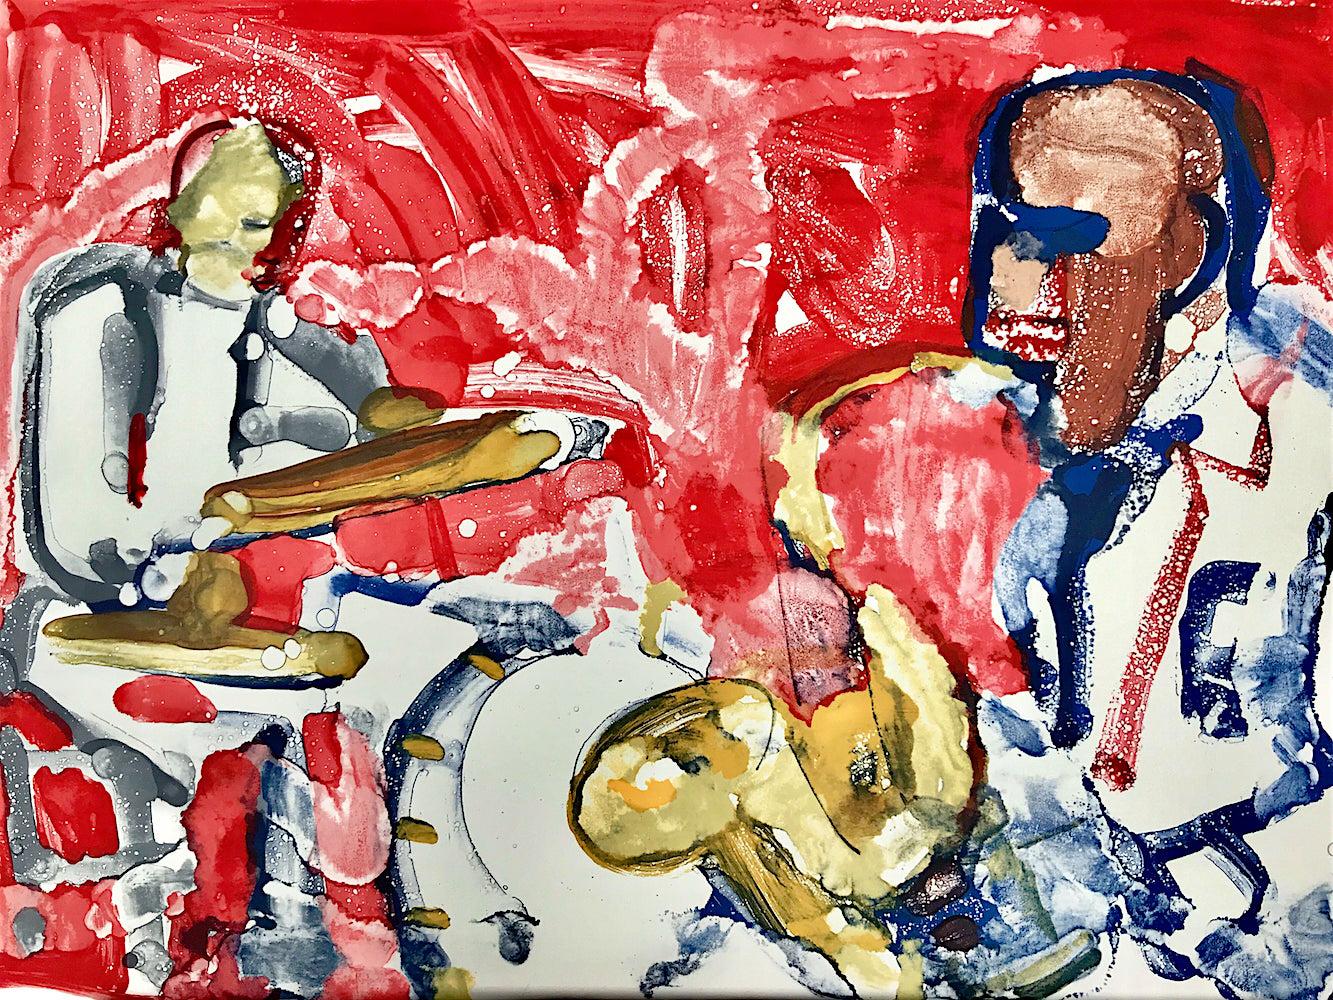 Romare Bearden Figurative Print - OUT CHORUS( RHYTHM SECTION) Signed Original Lithograph, Abstract Jazz Portrait